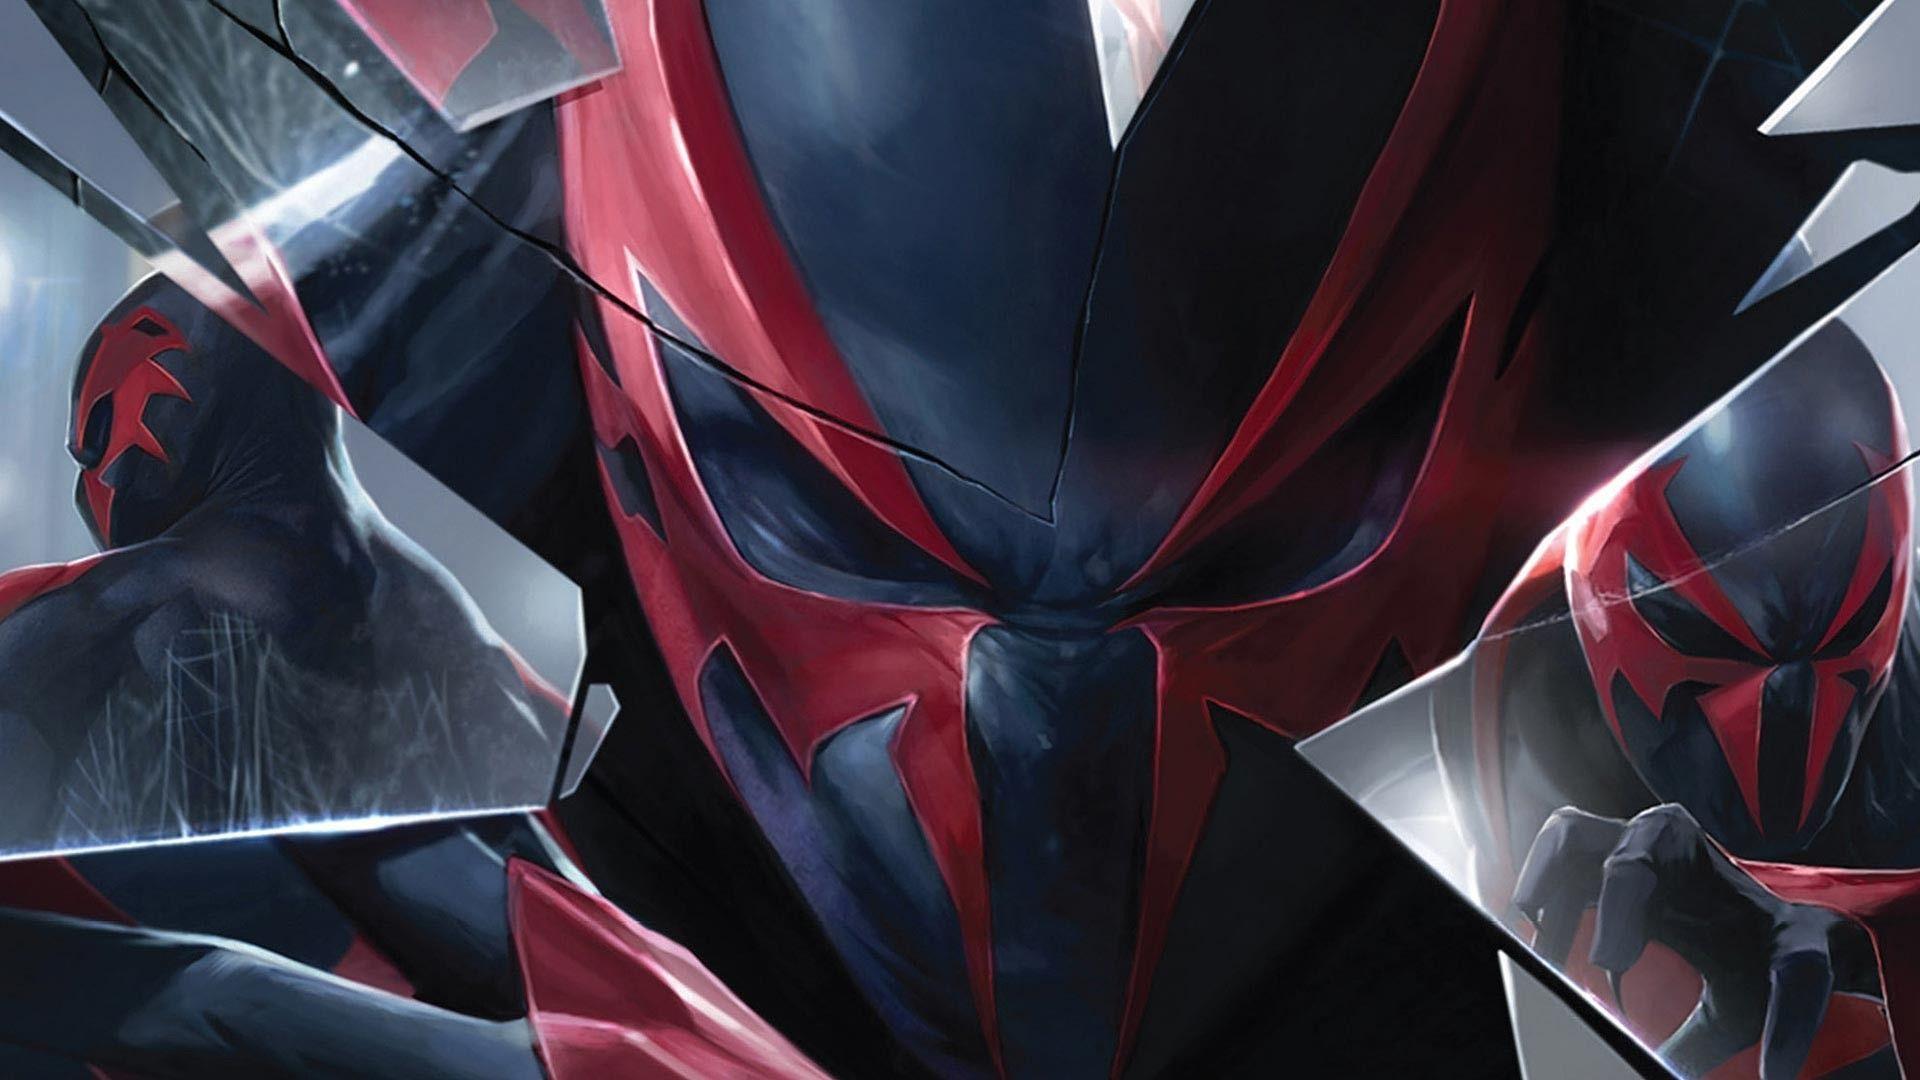 The Spider Man 2099 HD Superheroes 4k Wallpapers Images Backgrounds  Photos and Pictures